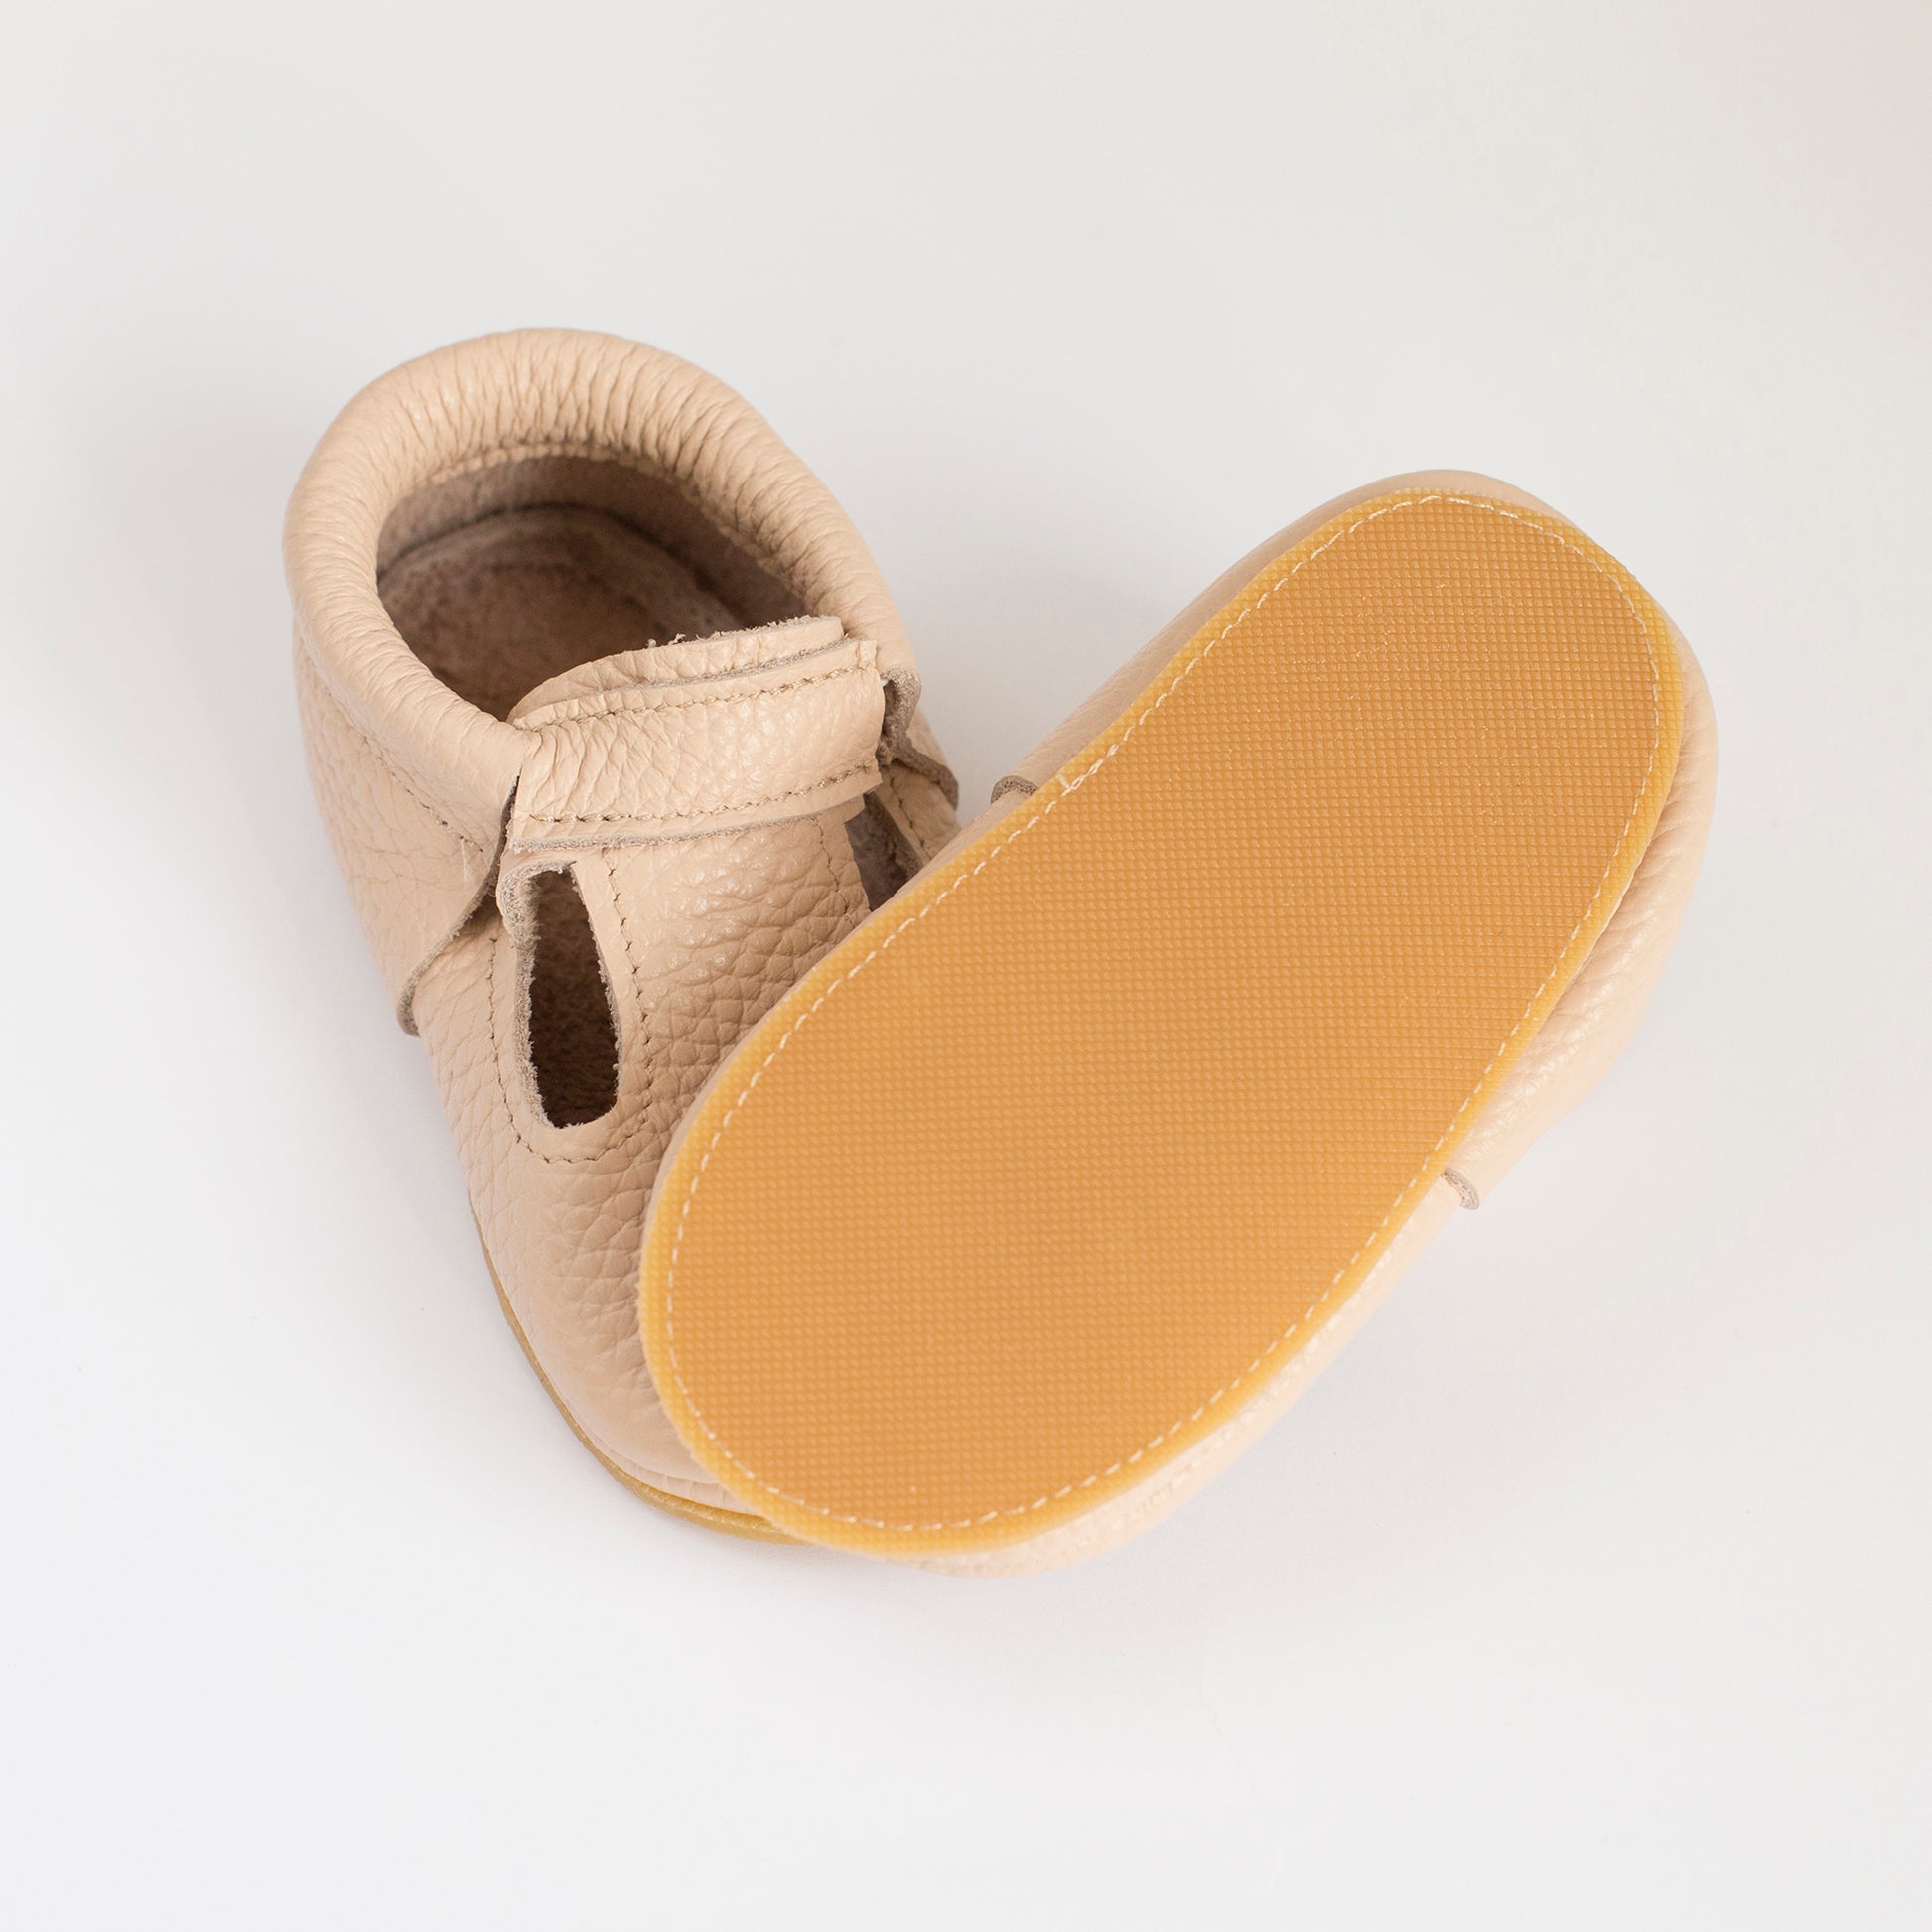 <img src="baby_shoes_with_rubber_sole.jpg" alt="baby shoes with rubber sole">